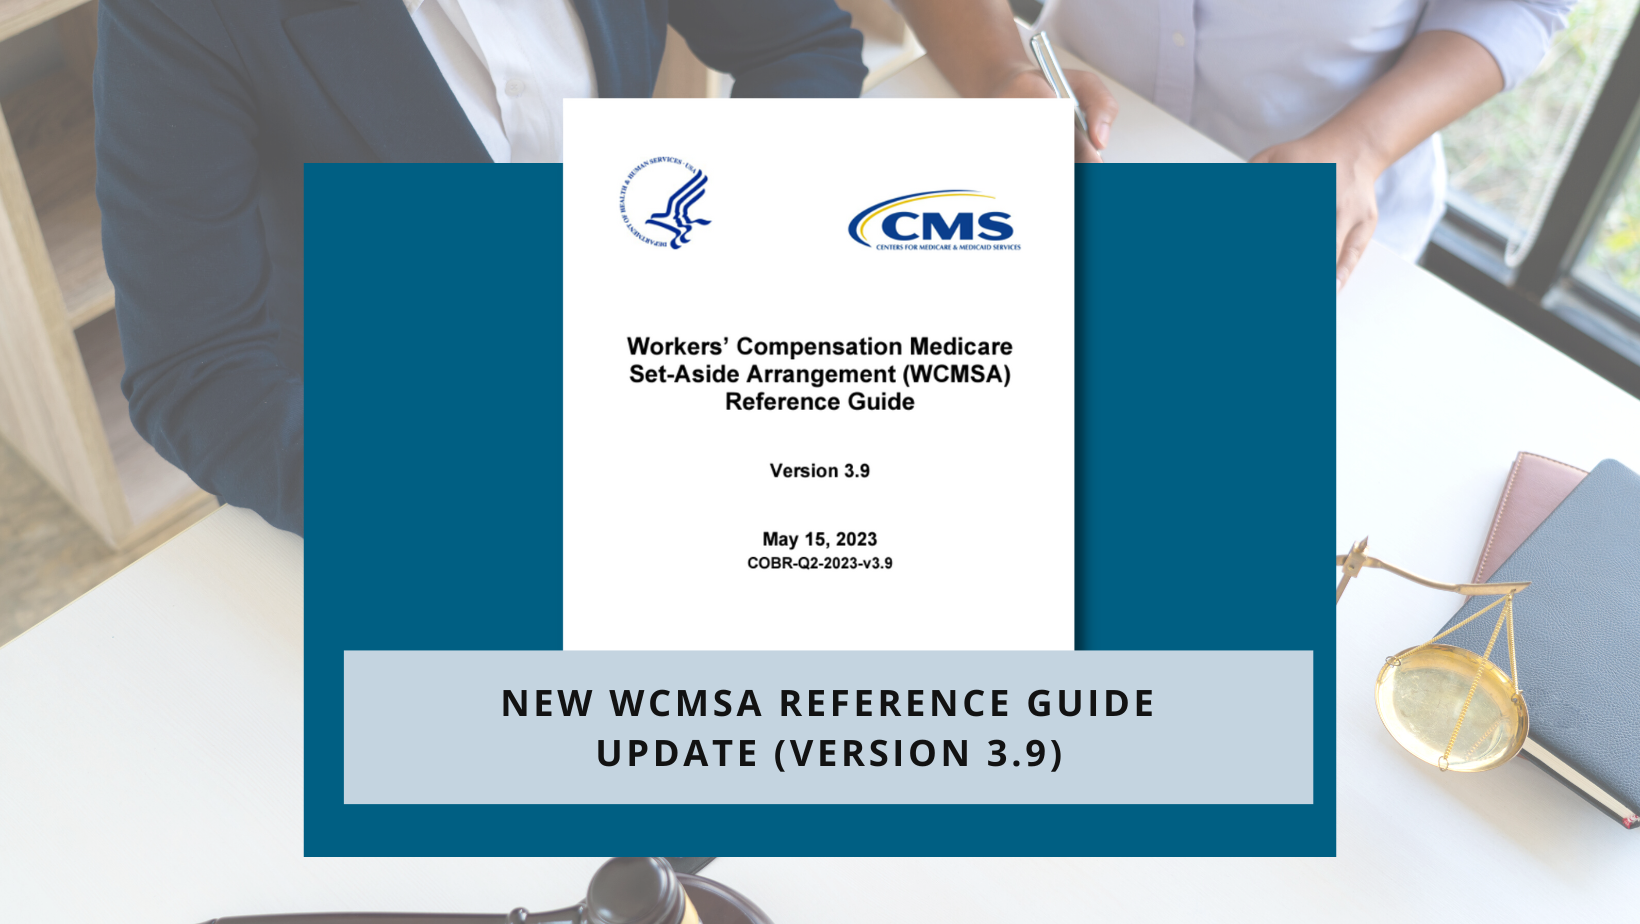 Update to the Workers’ Compensation MSA Reference Guide Version 3.9